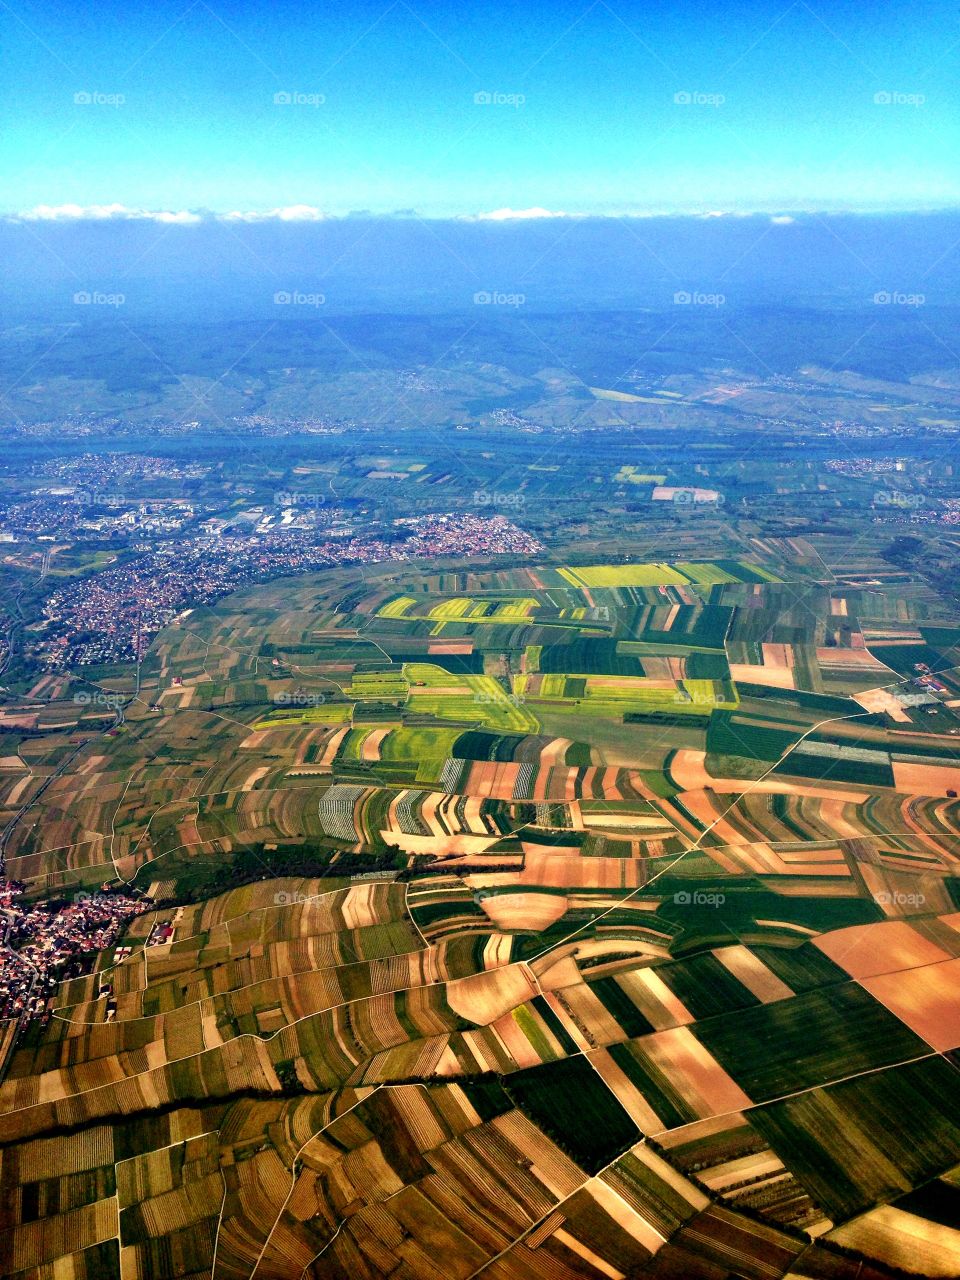 This is actually a view of Germany from my flight home. I had been in England and missed my flight home so the next available flight made a connection through Germany which gave me the opportunity to snap this awesome photo. 